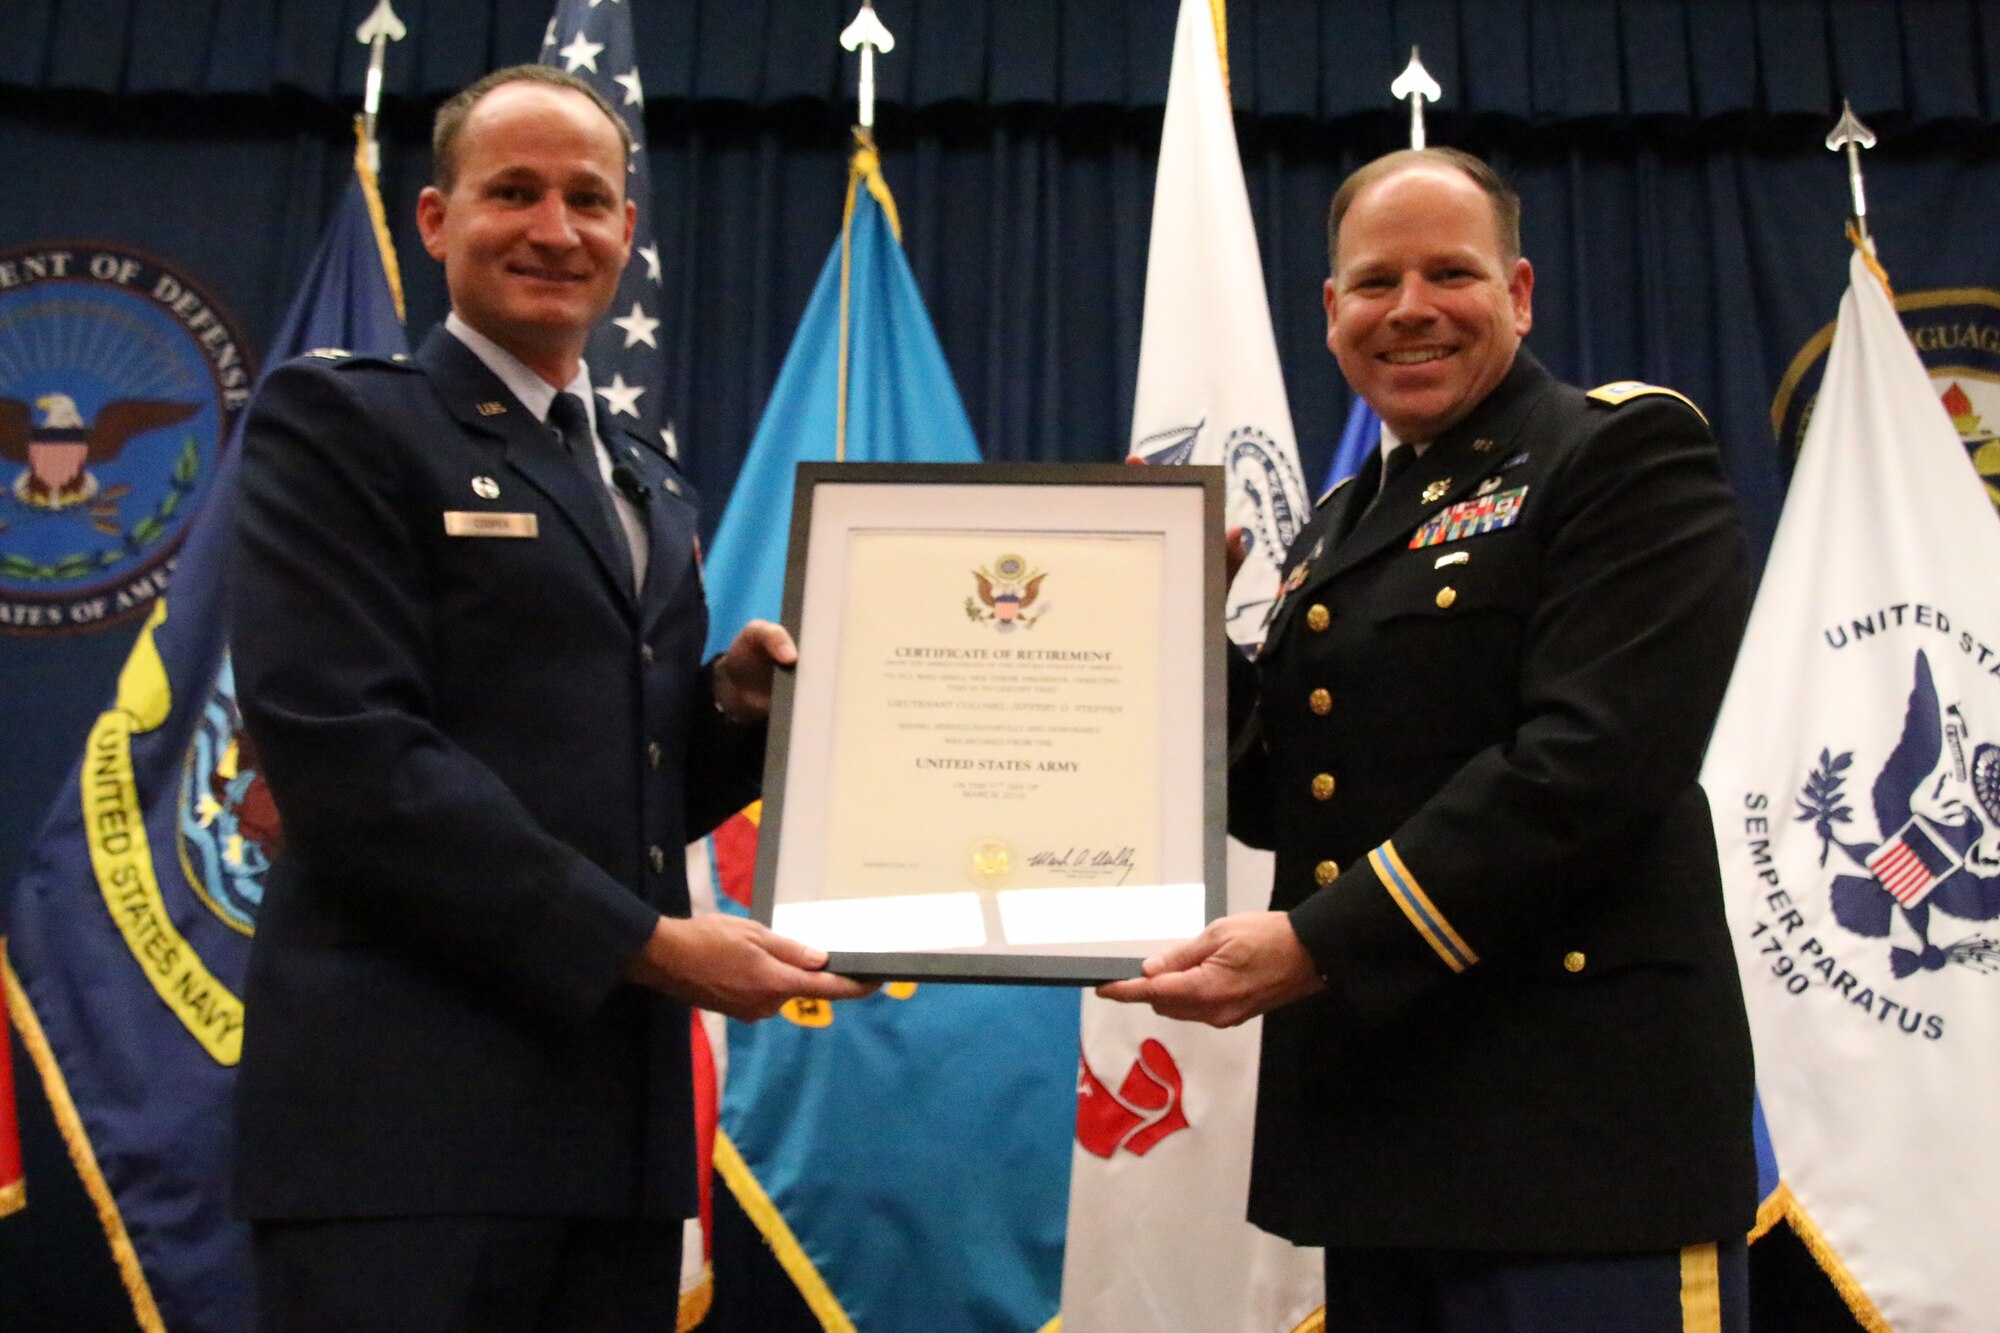 Lt. Col. Jeffery Stephen, former deputy commander of the Defense Language Institute English Language Center at Joint Base San Antonio-Lackland, receives a certificate of appreciation from Col. Jeffery Cooper, DLIELC commandant and 673th Training Group commander during Steffen's retirement ceremony Jan. 30, 2016. Steffen returned to DLIELC soon after his military retirement to become an English instructor.